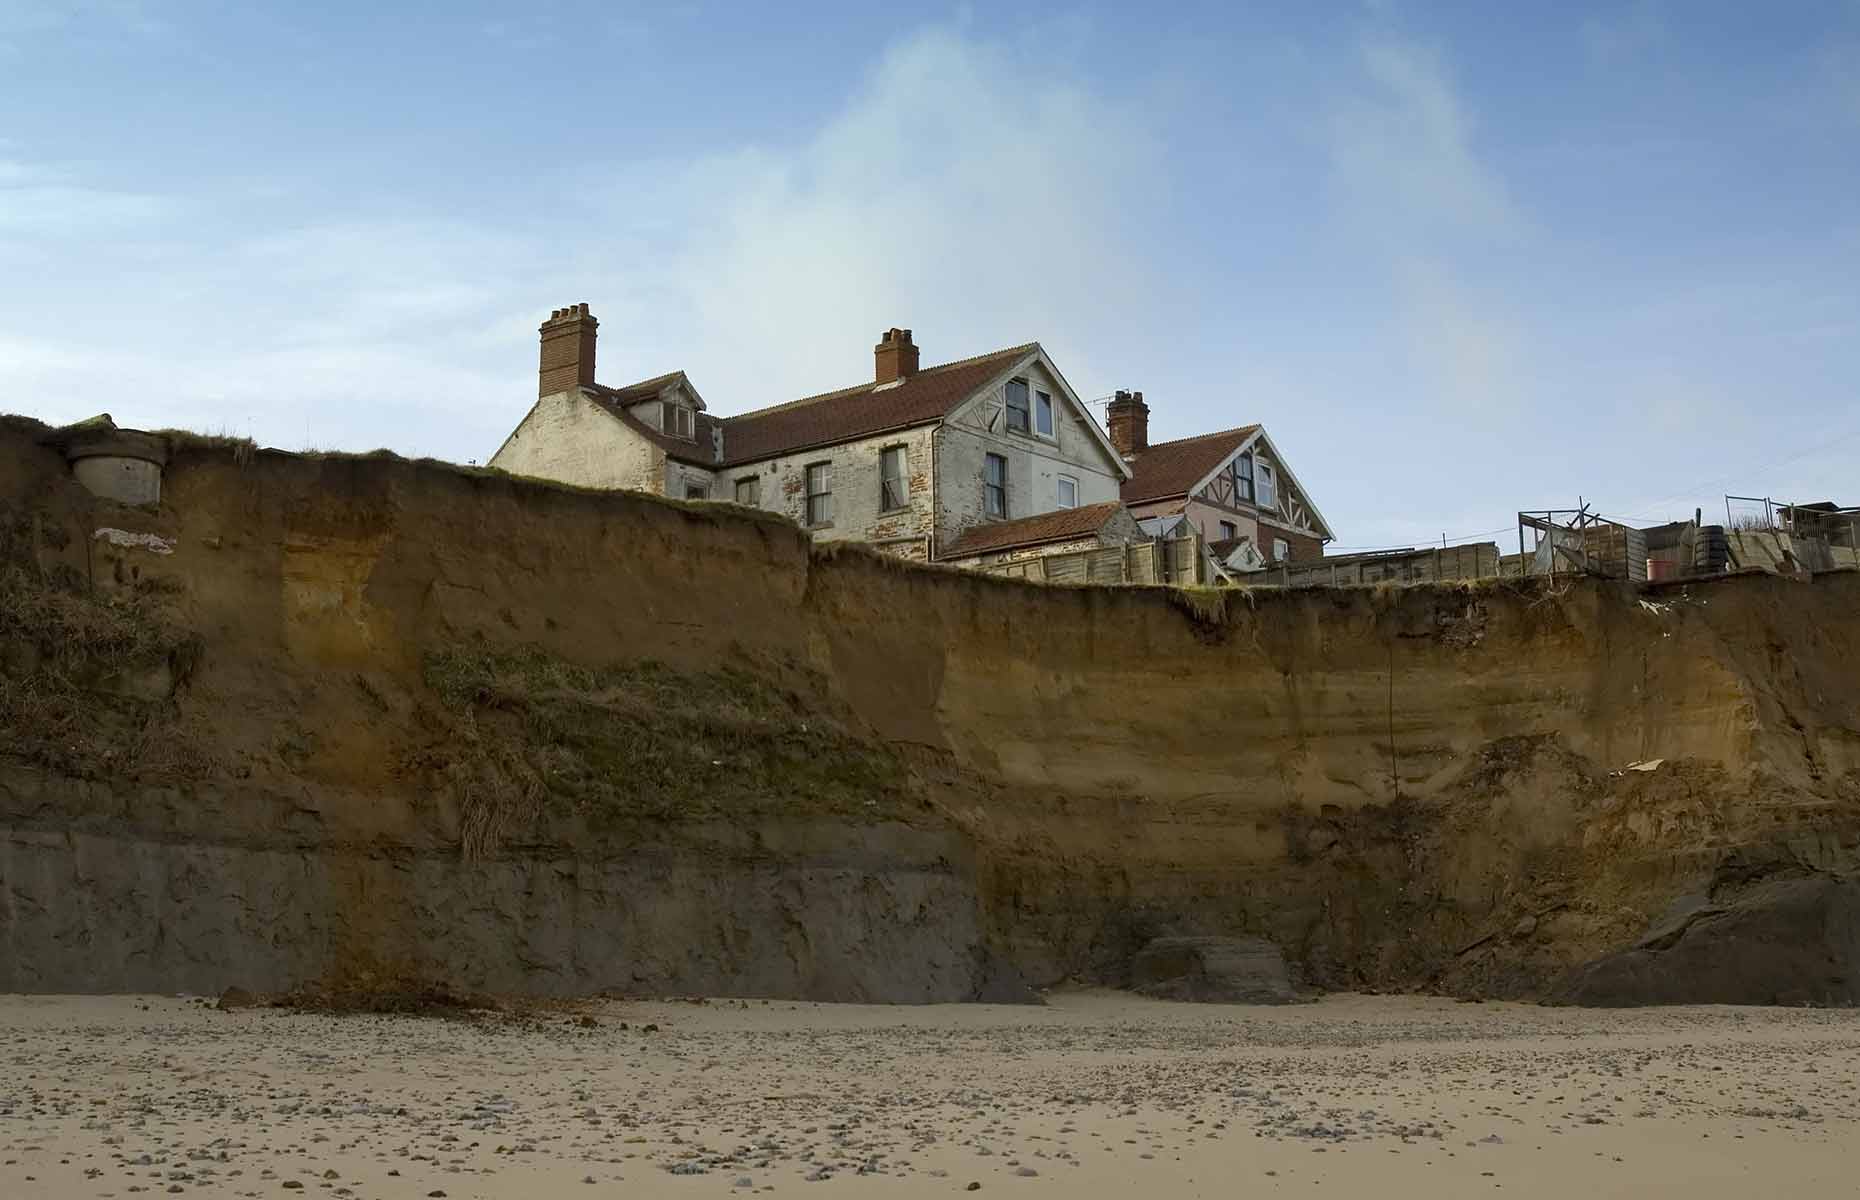 The town of Happisburgh in Norfolk suffers from severe coastal erosion linked to rising sea levels. Image: Chris I White / Shutterstock